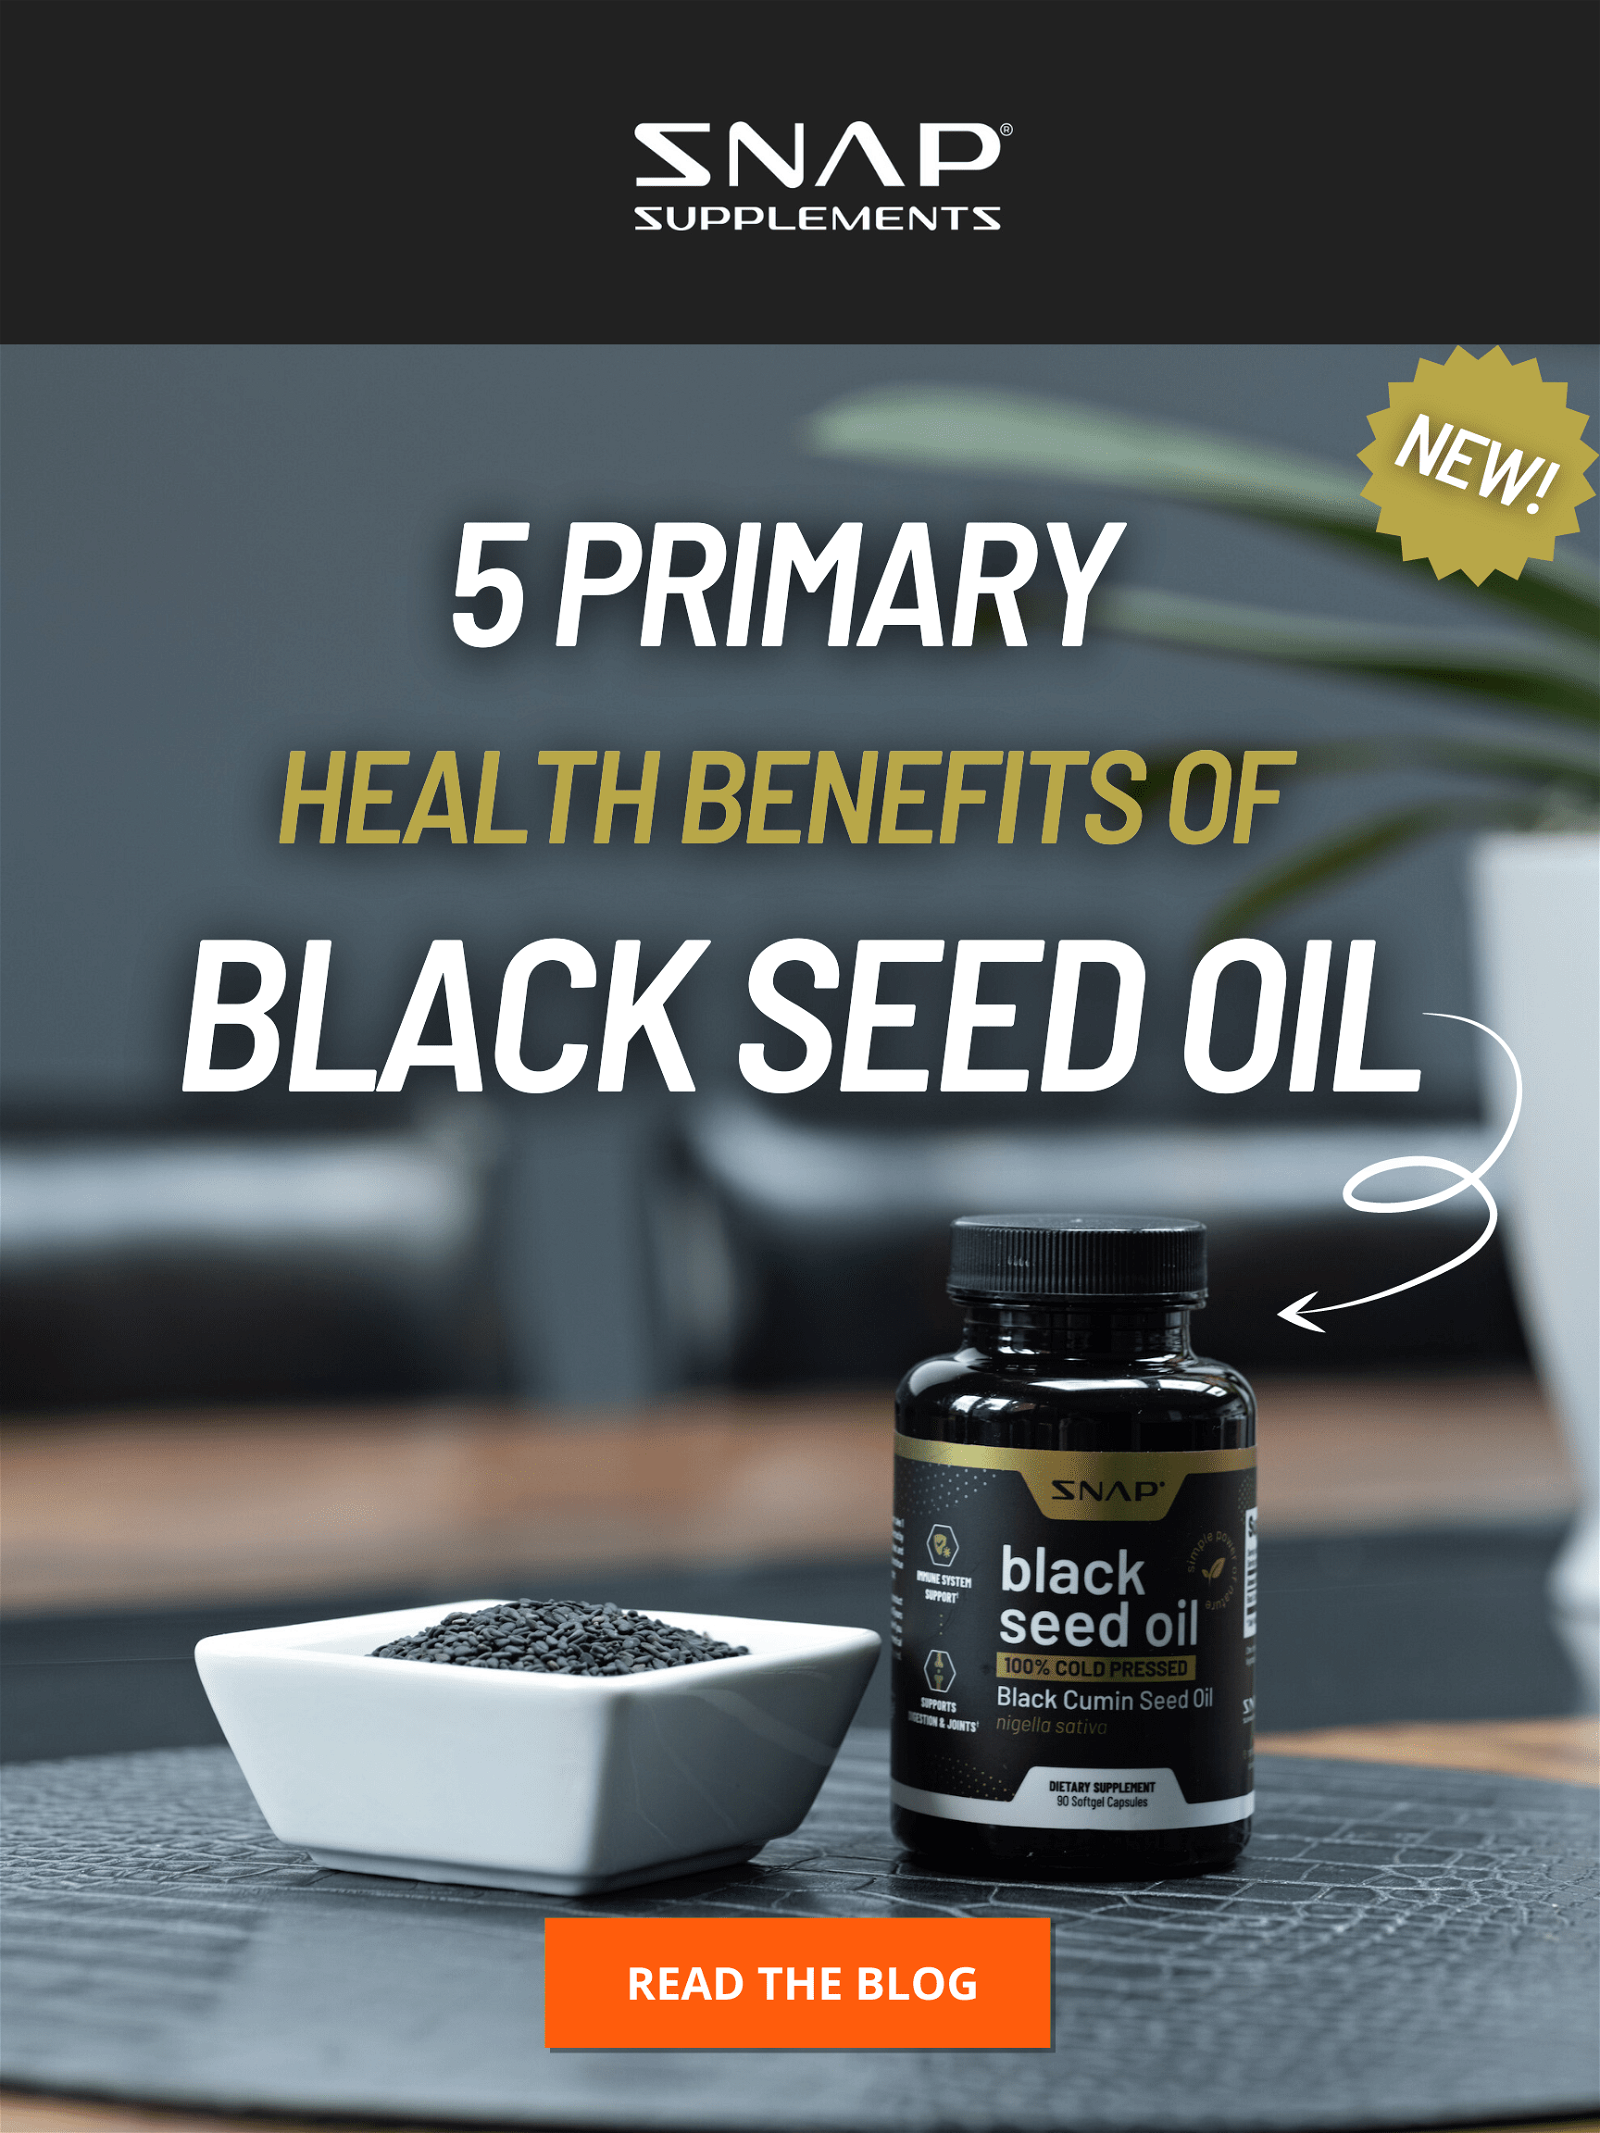 5 health benefits of black seed oil you should know